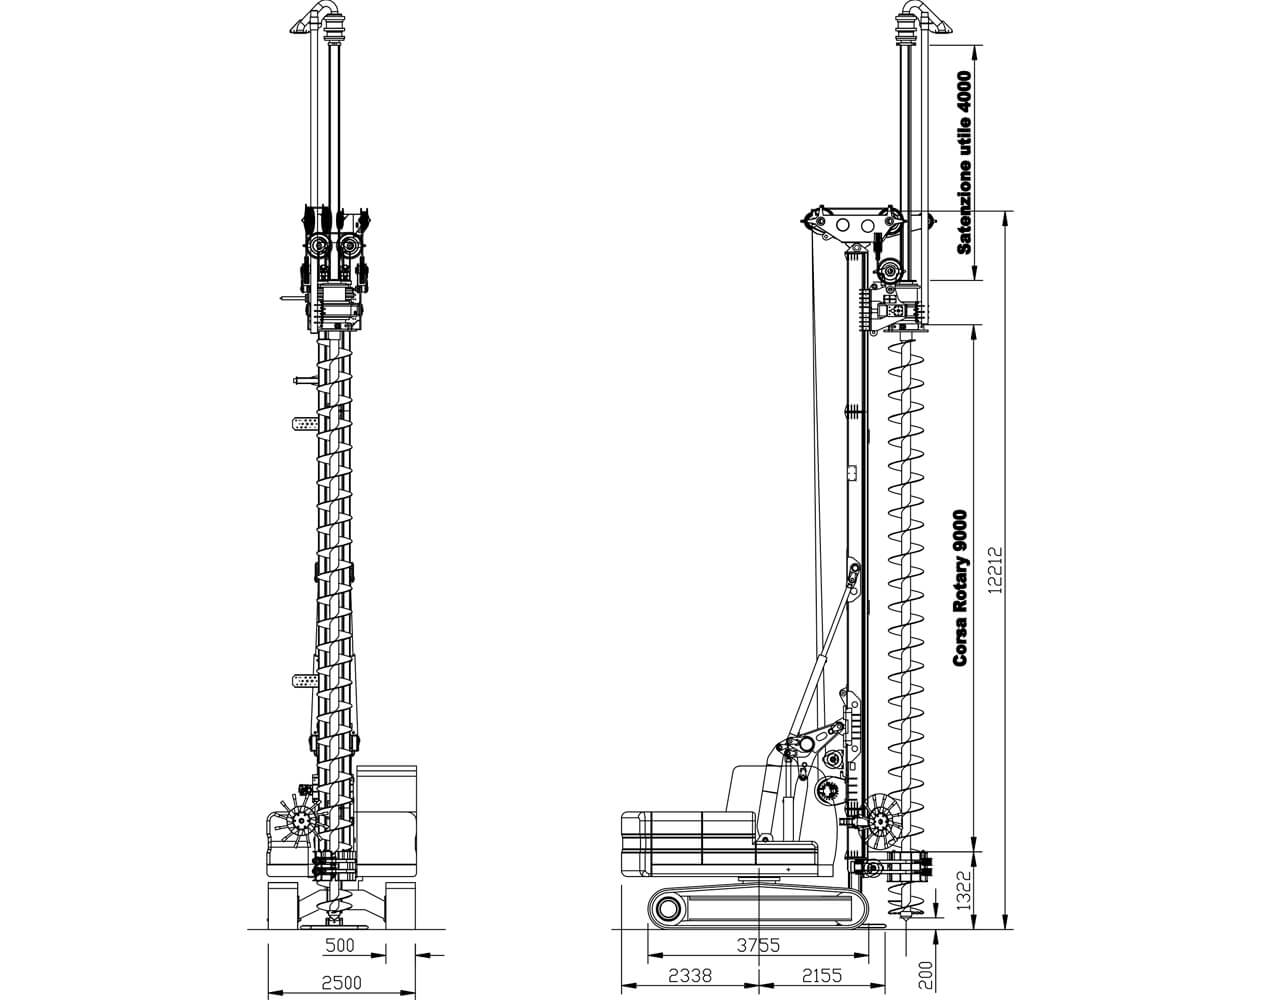 DEC - Drilling Equipment Construction - Made in Italy